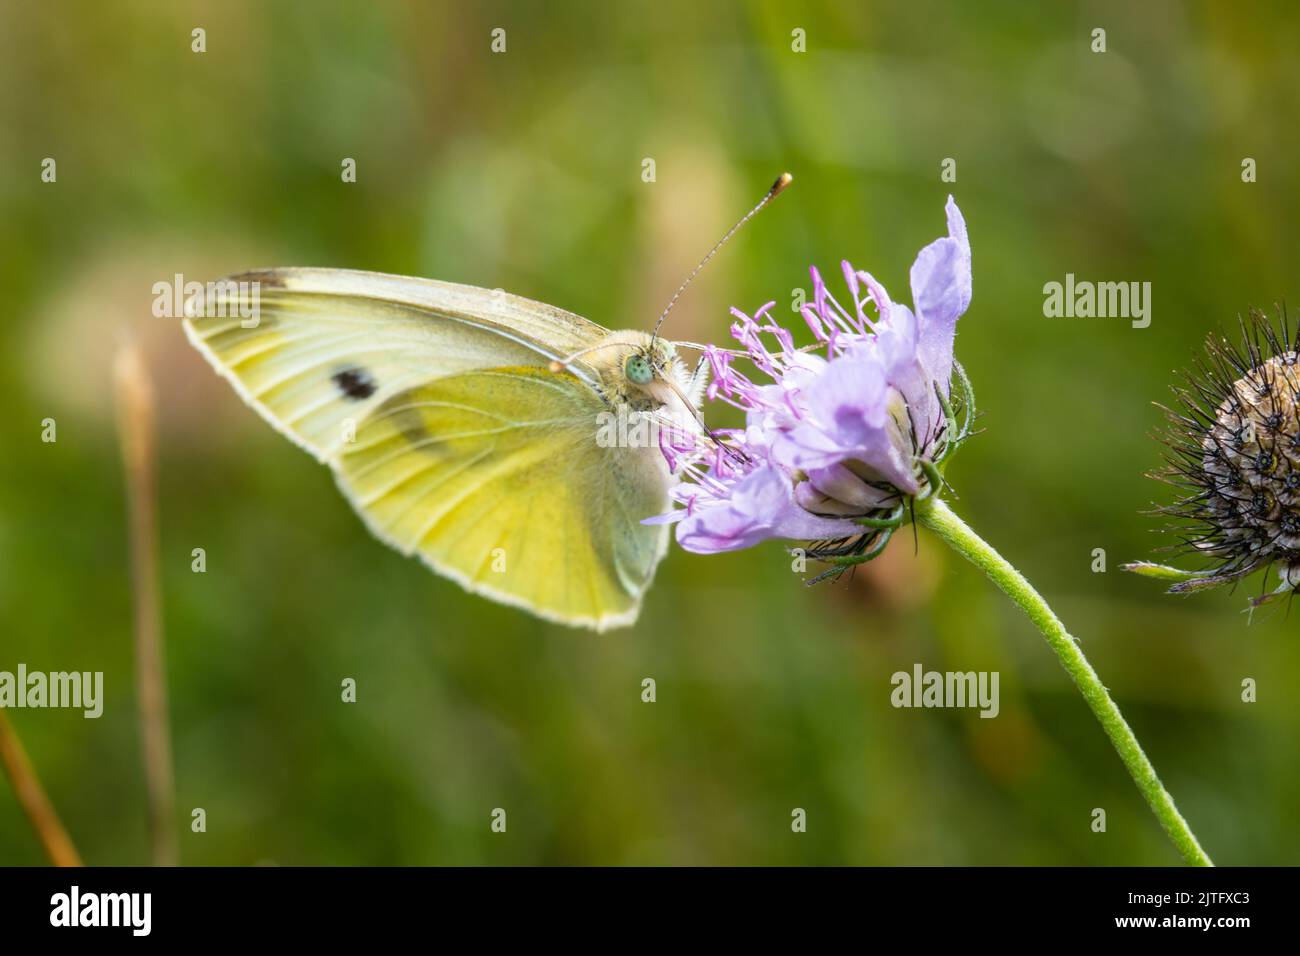 Pieris rapae, known by many common names including small white butterfly, cabbage white, cabbage butterfly, small cabbage white and white butterfly. Stock Photo